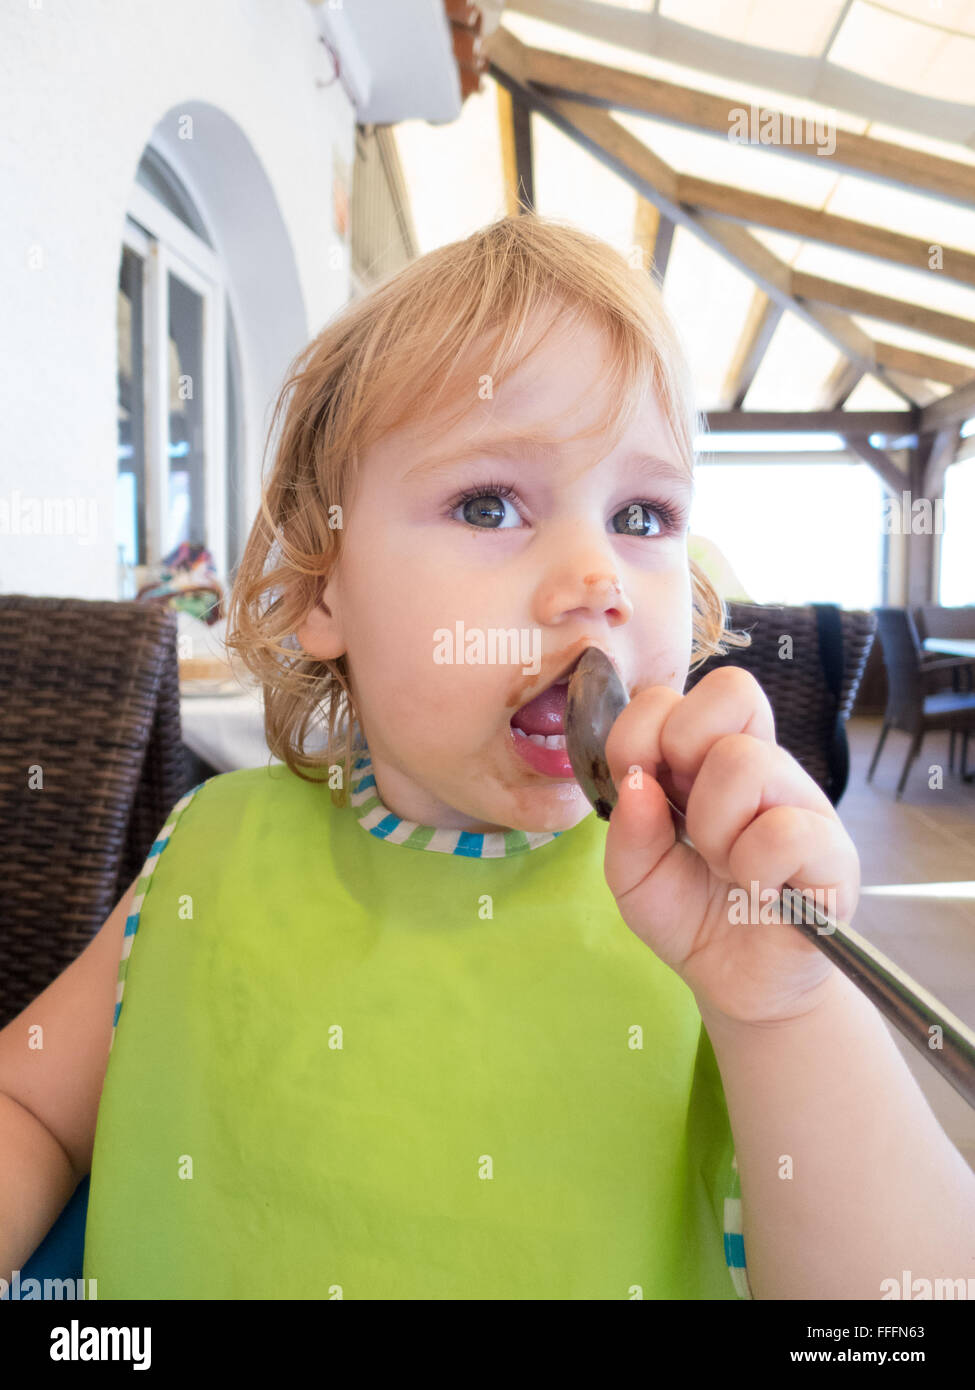 face of blonde baby two years old green bib and silver metal spoon in her mouth and smeared with chocolate in restaurant Stock Photo